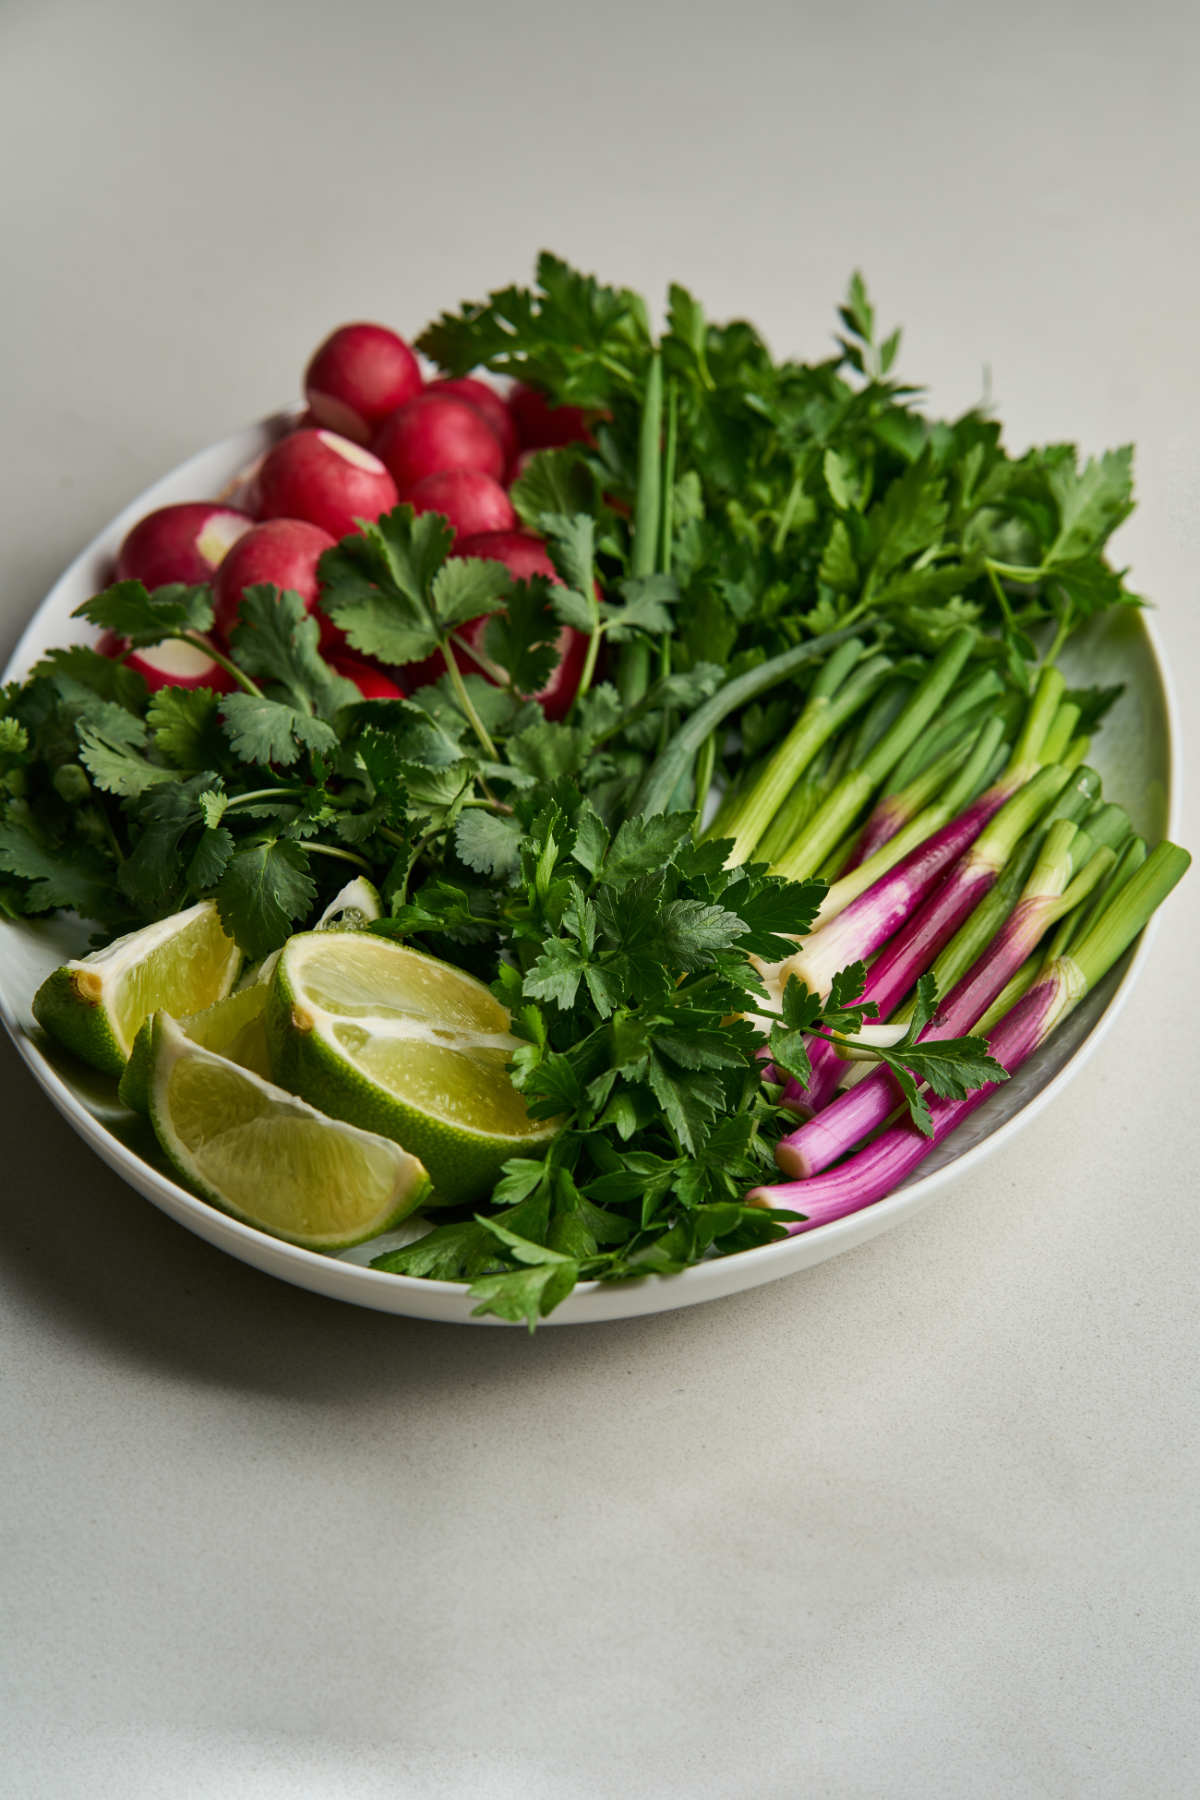 Herbs, scallions, limes, and radishes on a large plate.